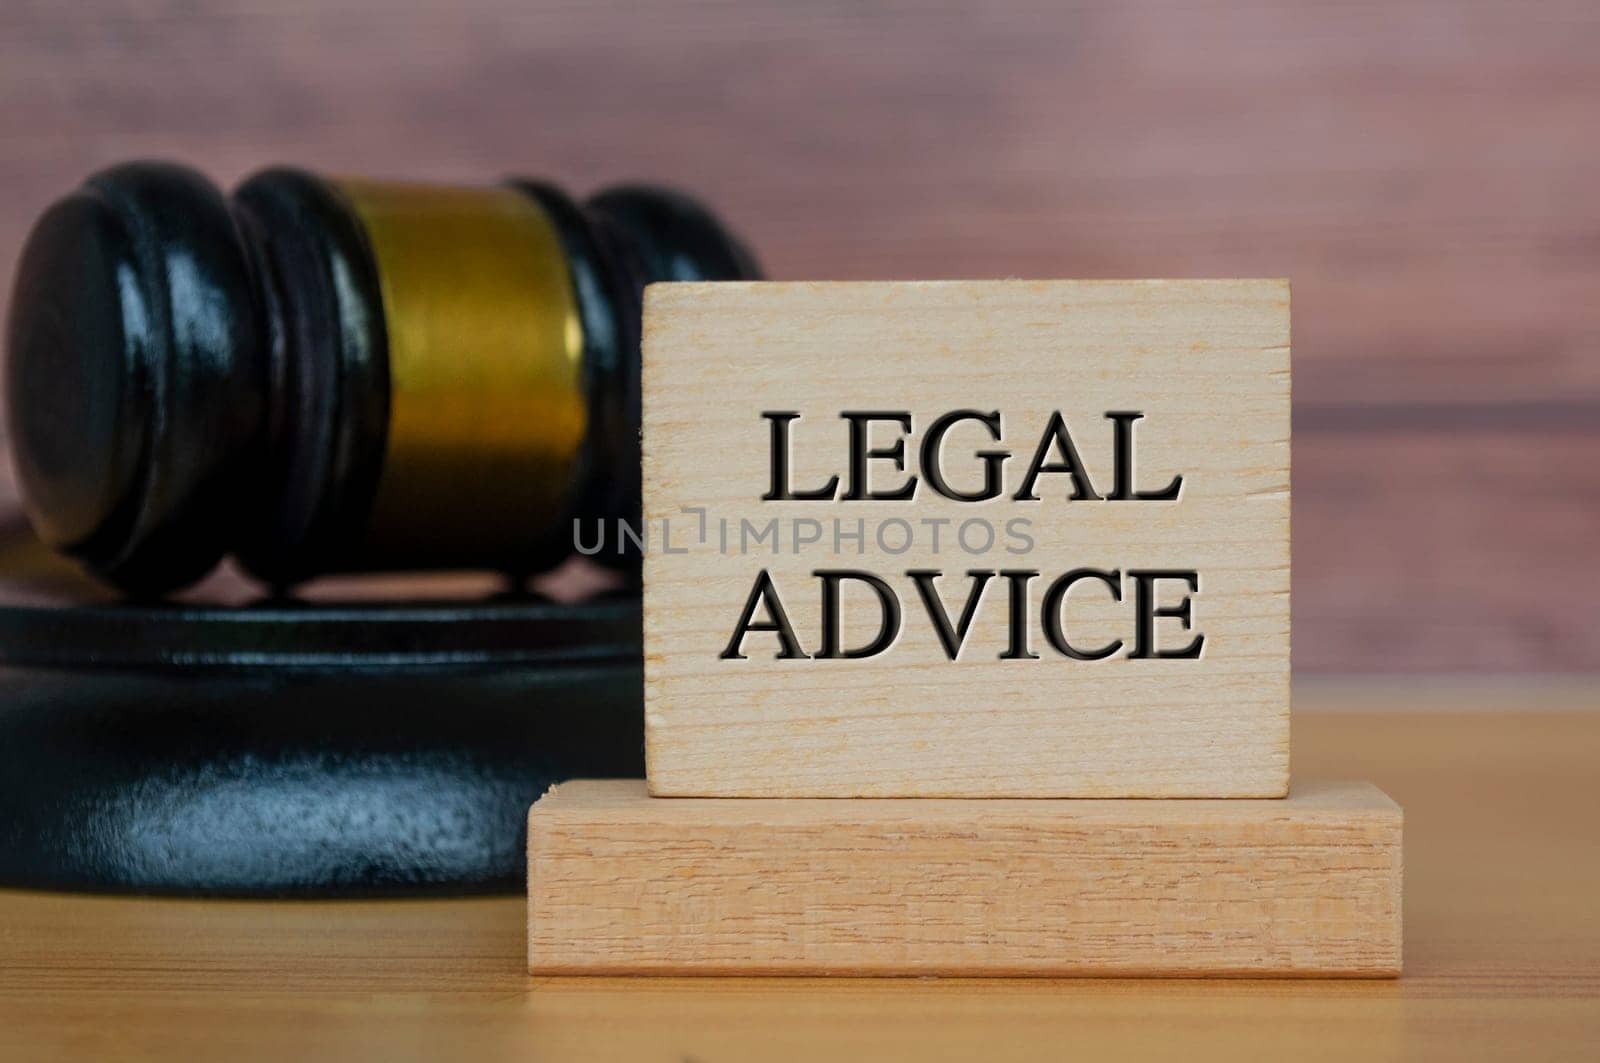 Legal advice text engraved on wooden block with gavel background. Legal and law concept. by yom98